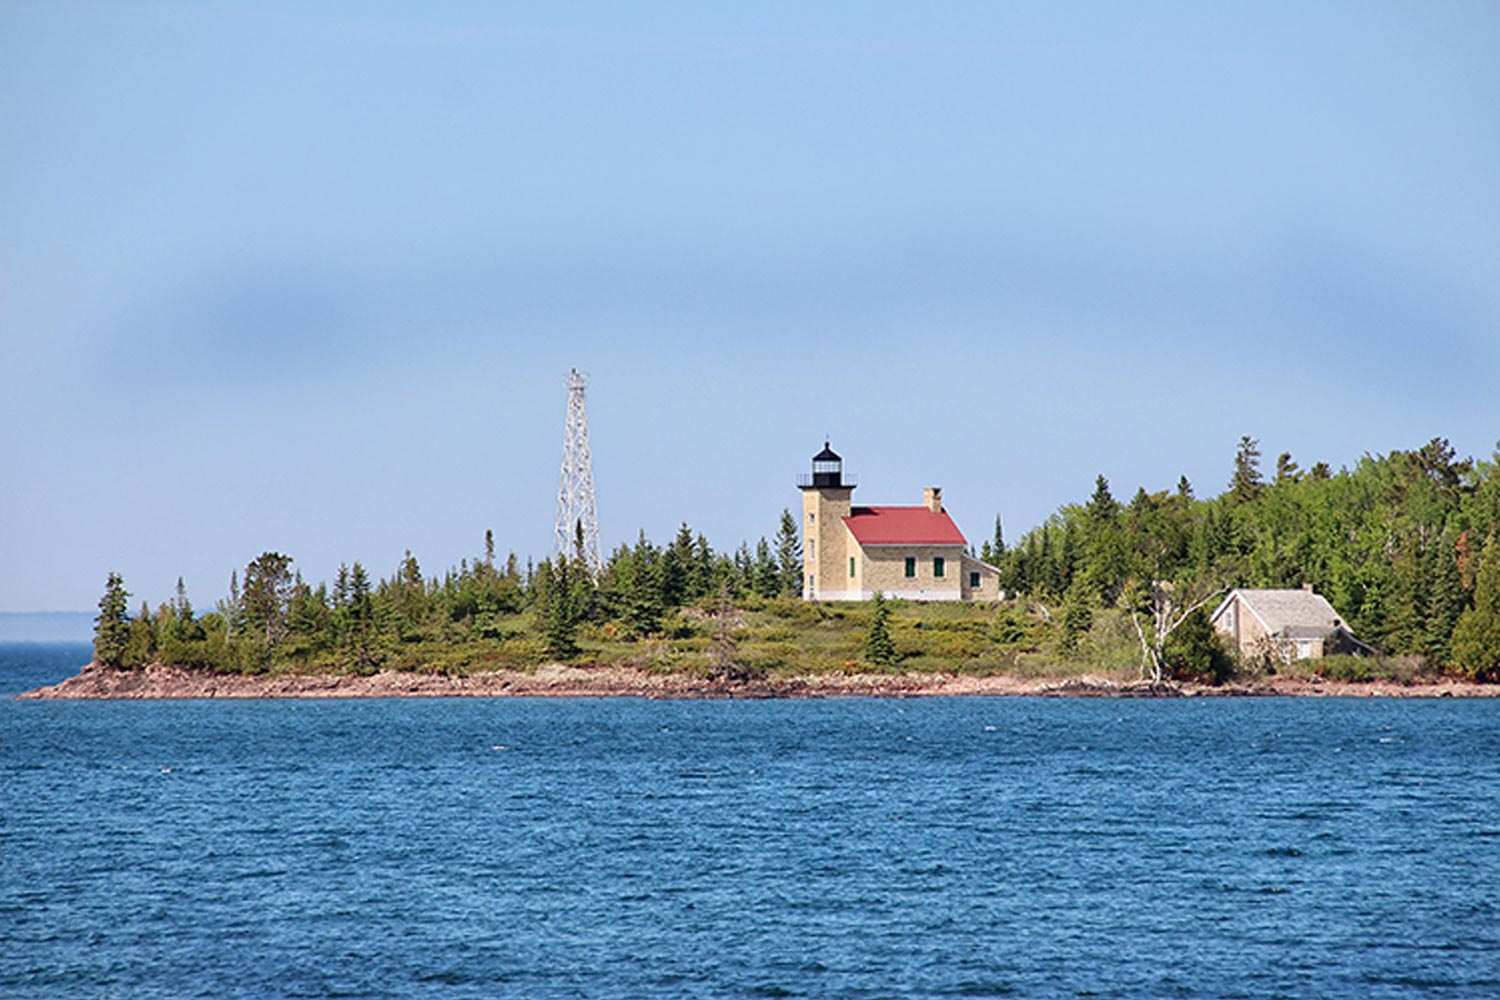 far view of Copper Harbor Lighthouse on Lake Superior